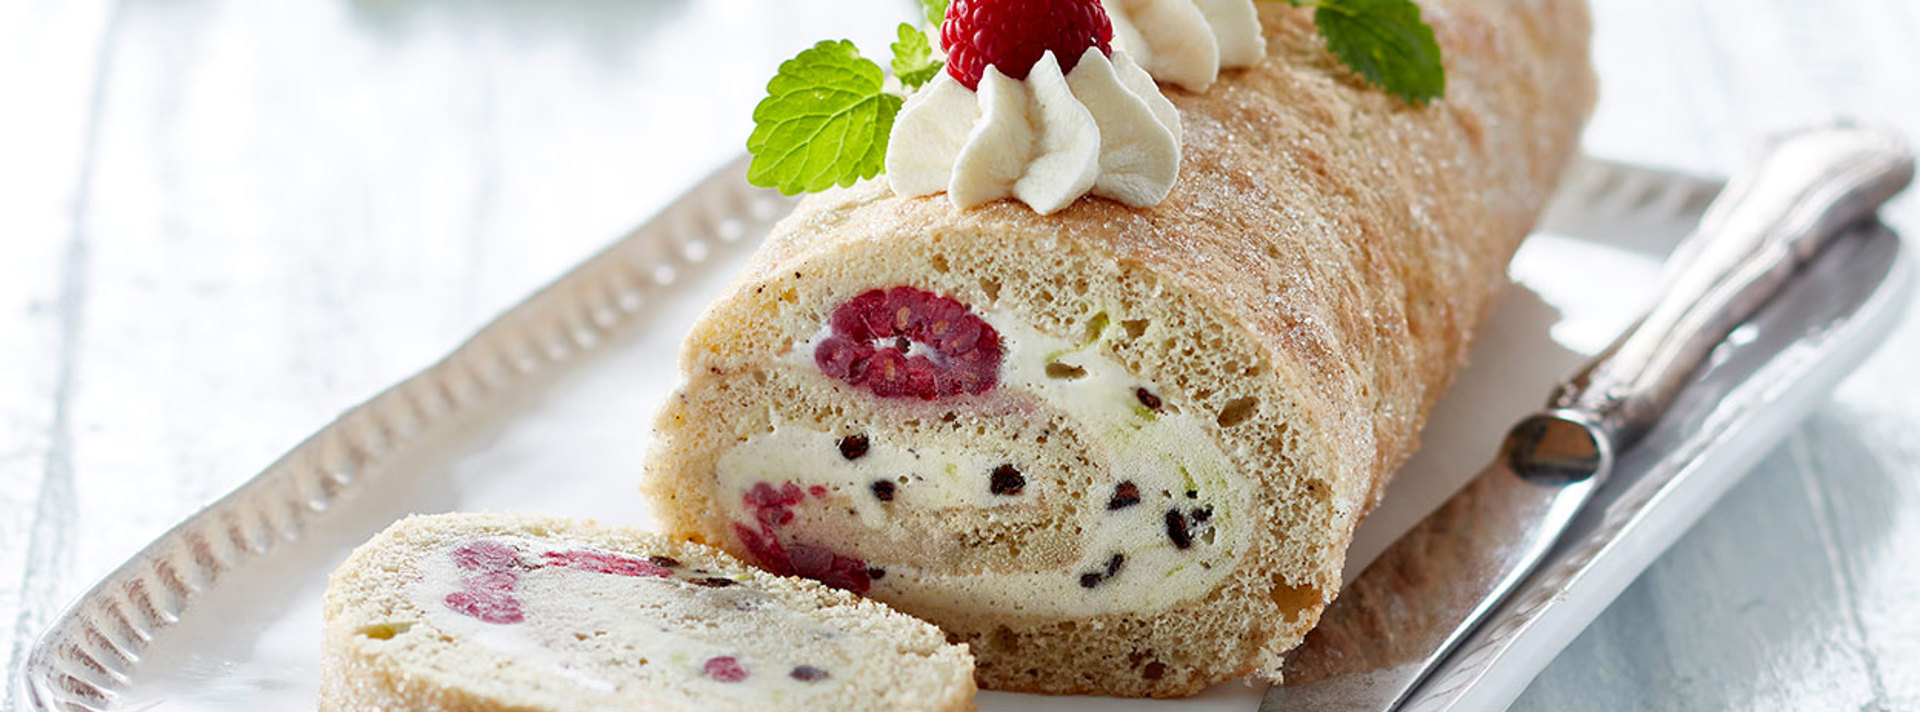 Isroulade Med Choko Marcipan Is Stor 1248X463px